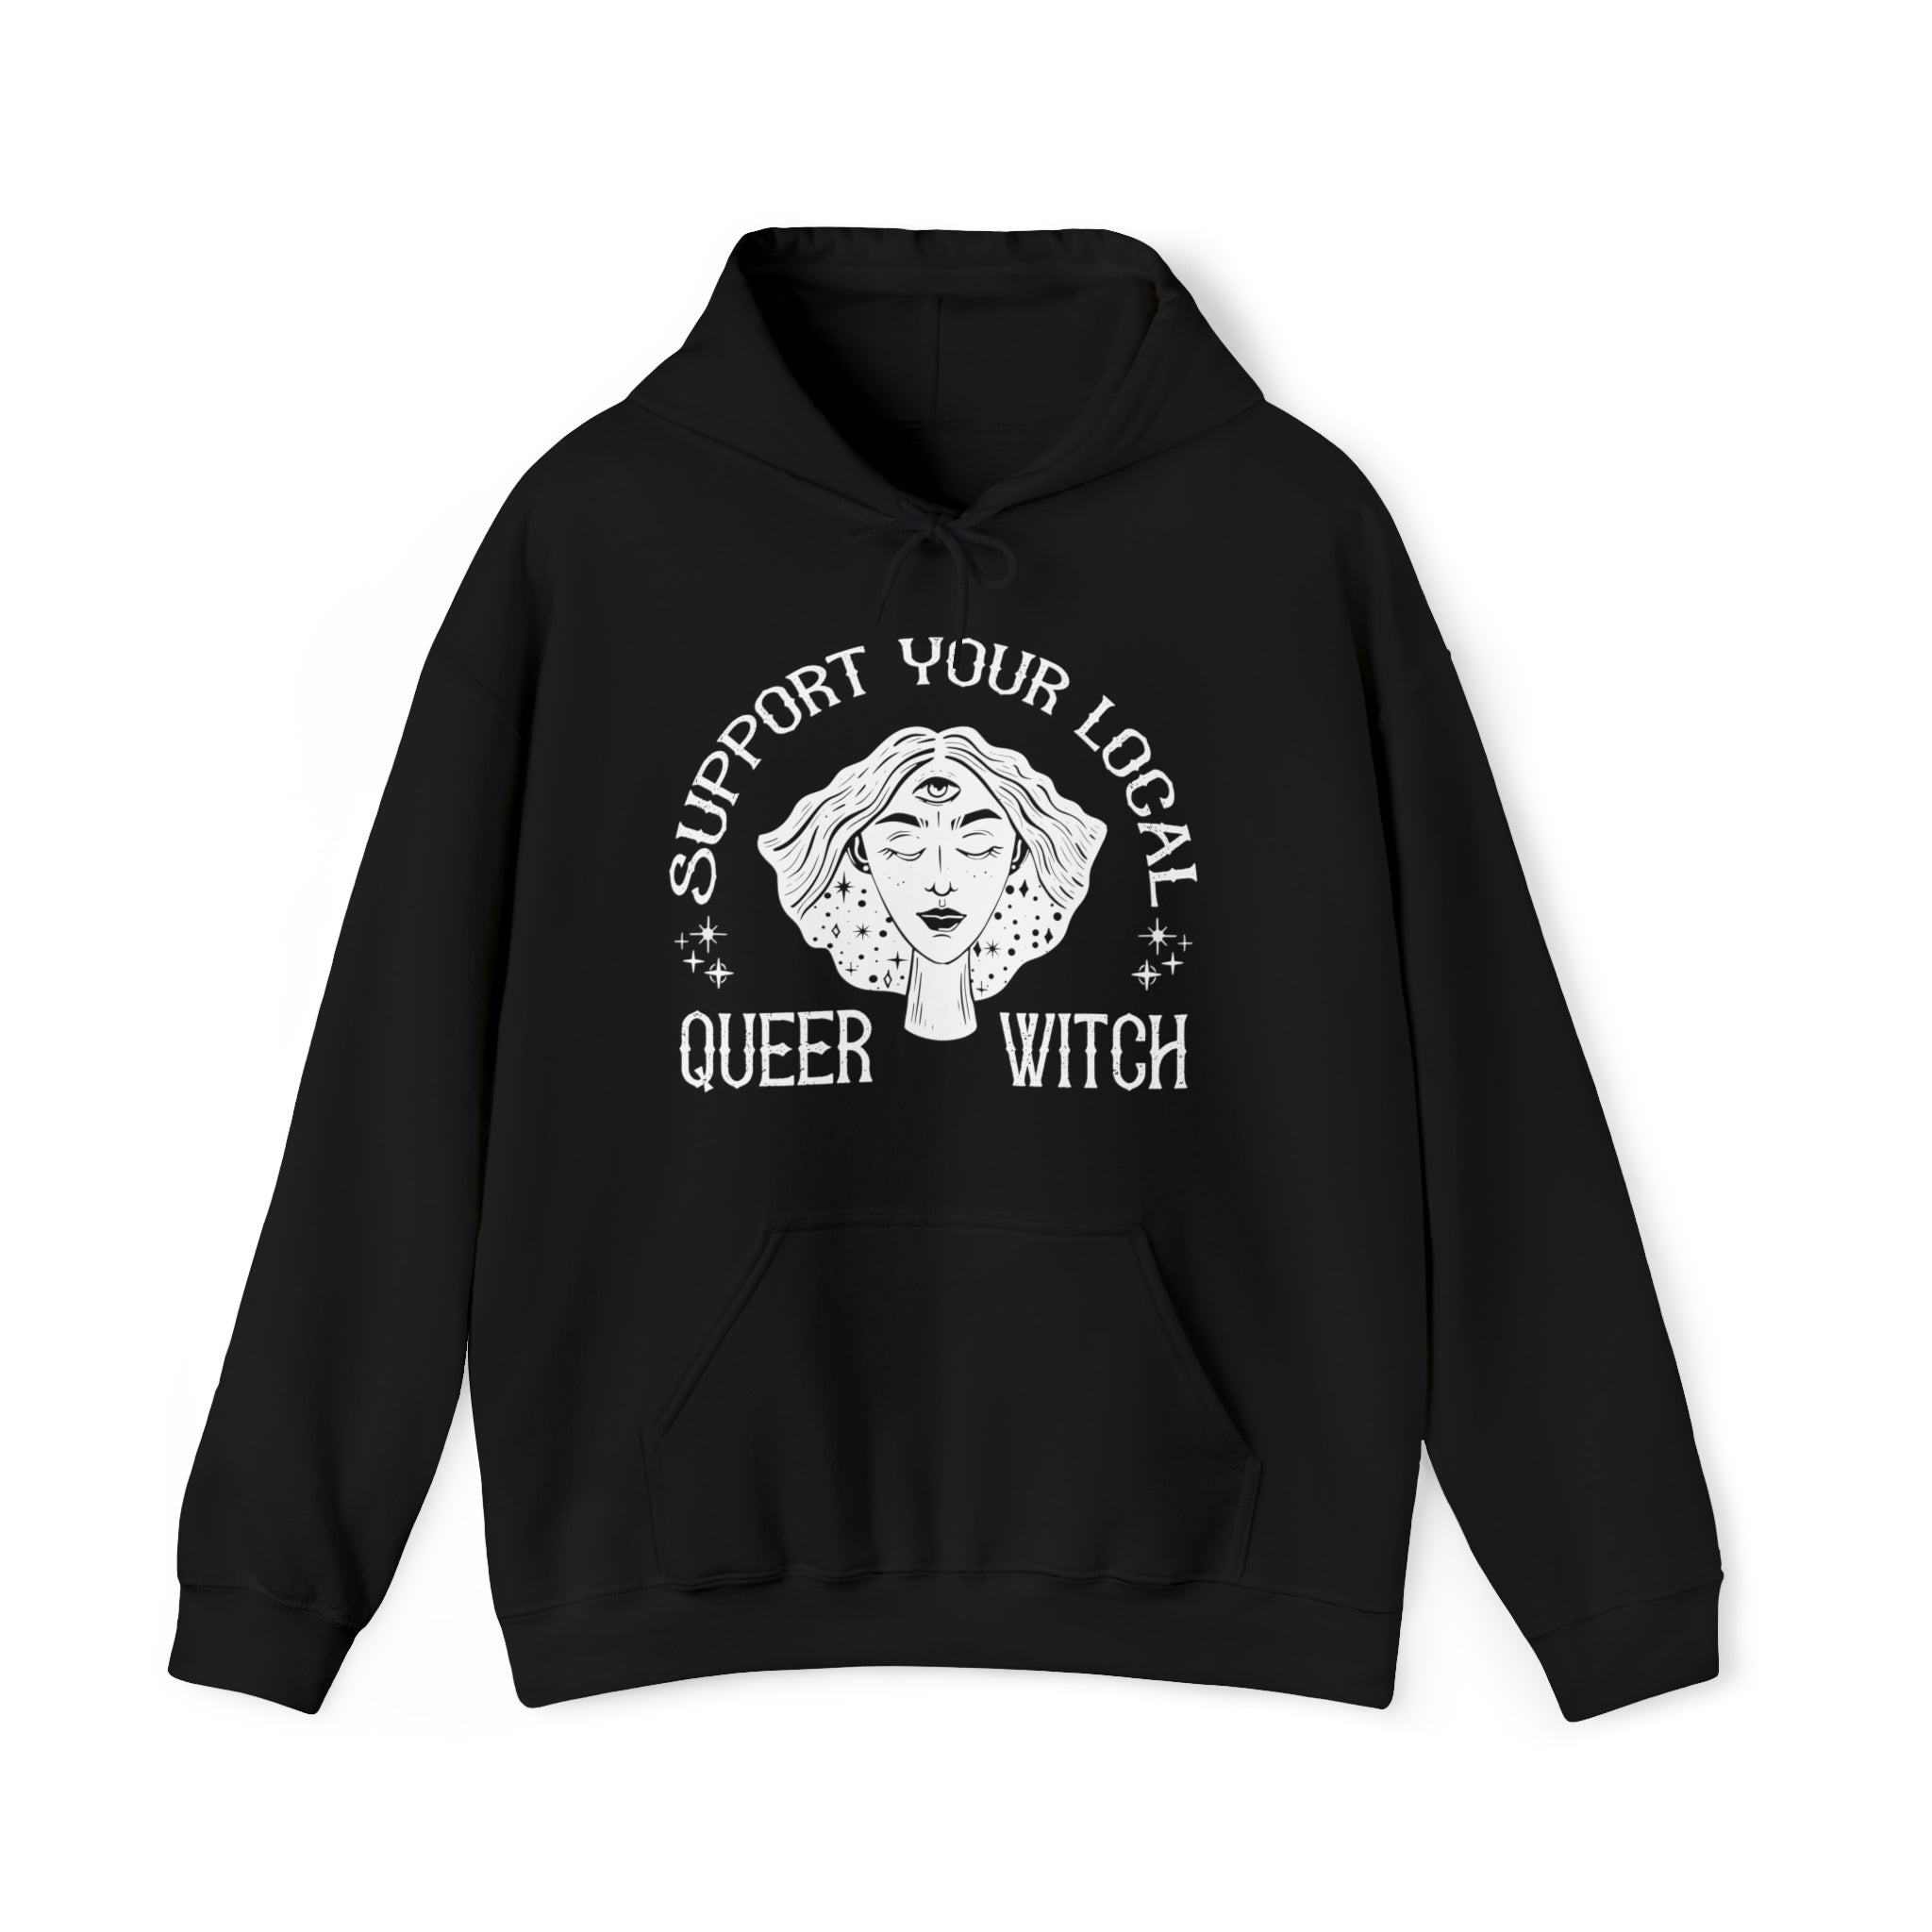 "Support Your Local Queer Witch" Halloween Hooded Sweatshirt